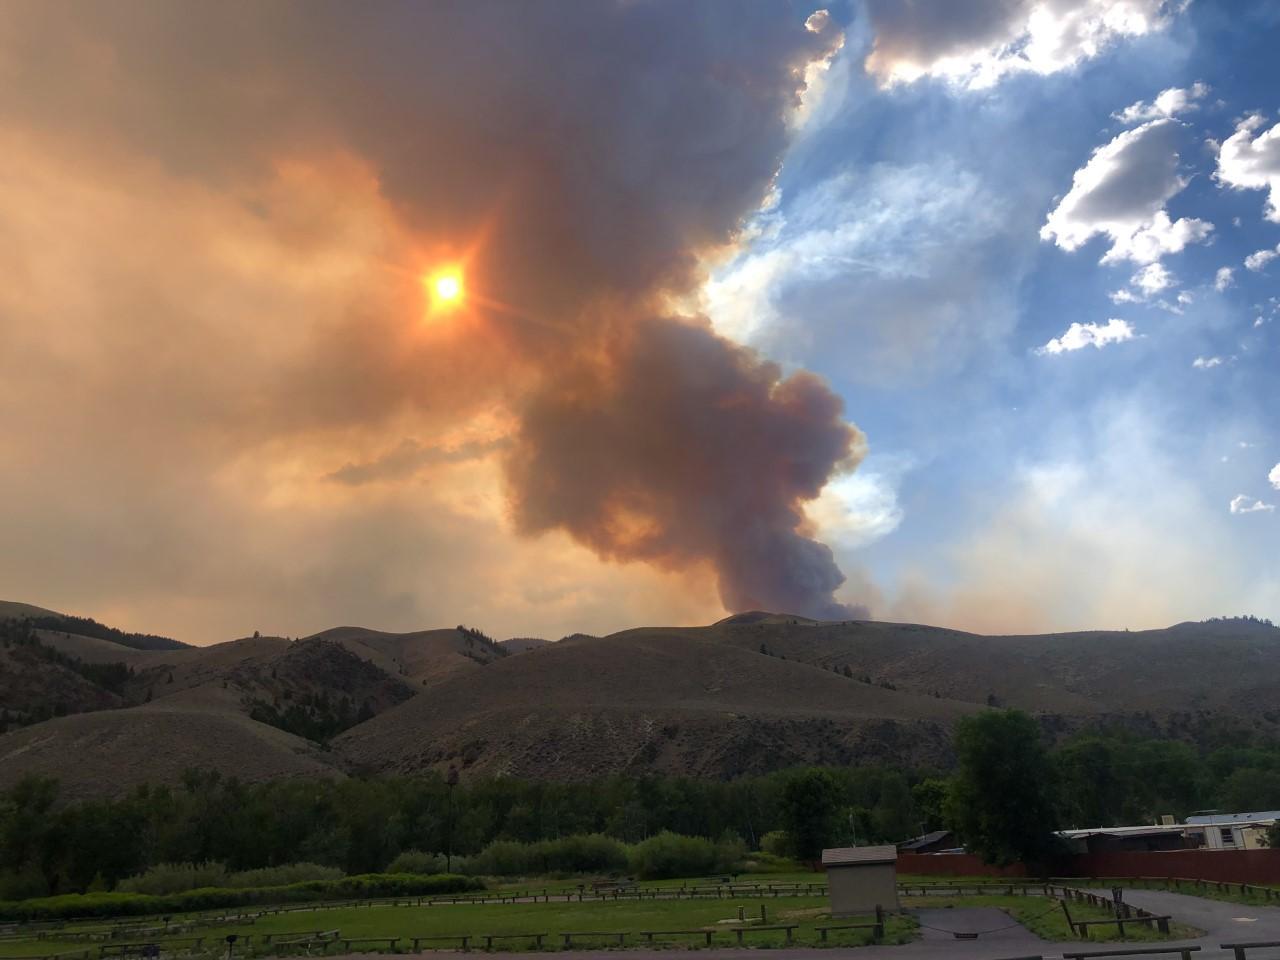 Photograph of the Moose Fire in Idaho, 2022. The photo shows a plume of smoke rising from behind rolling hills. The sun can be seen through the smoke, and it appears orange. The part of the sky not blotted out by smoke in the upper right side of the image is blue with fluffy clouds. The foreground is a flat landscape with green vegetation.